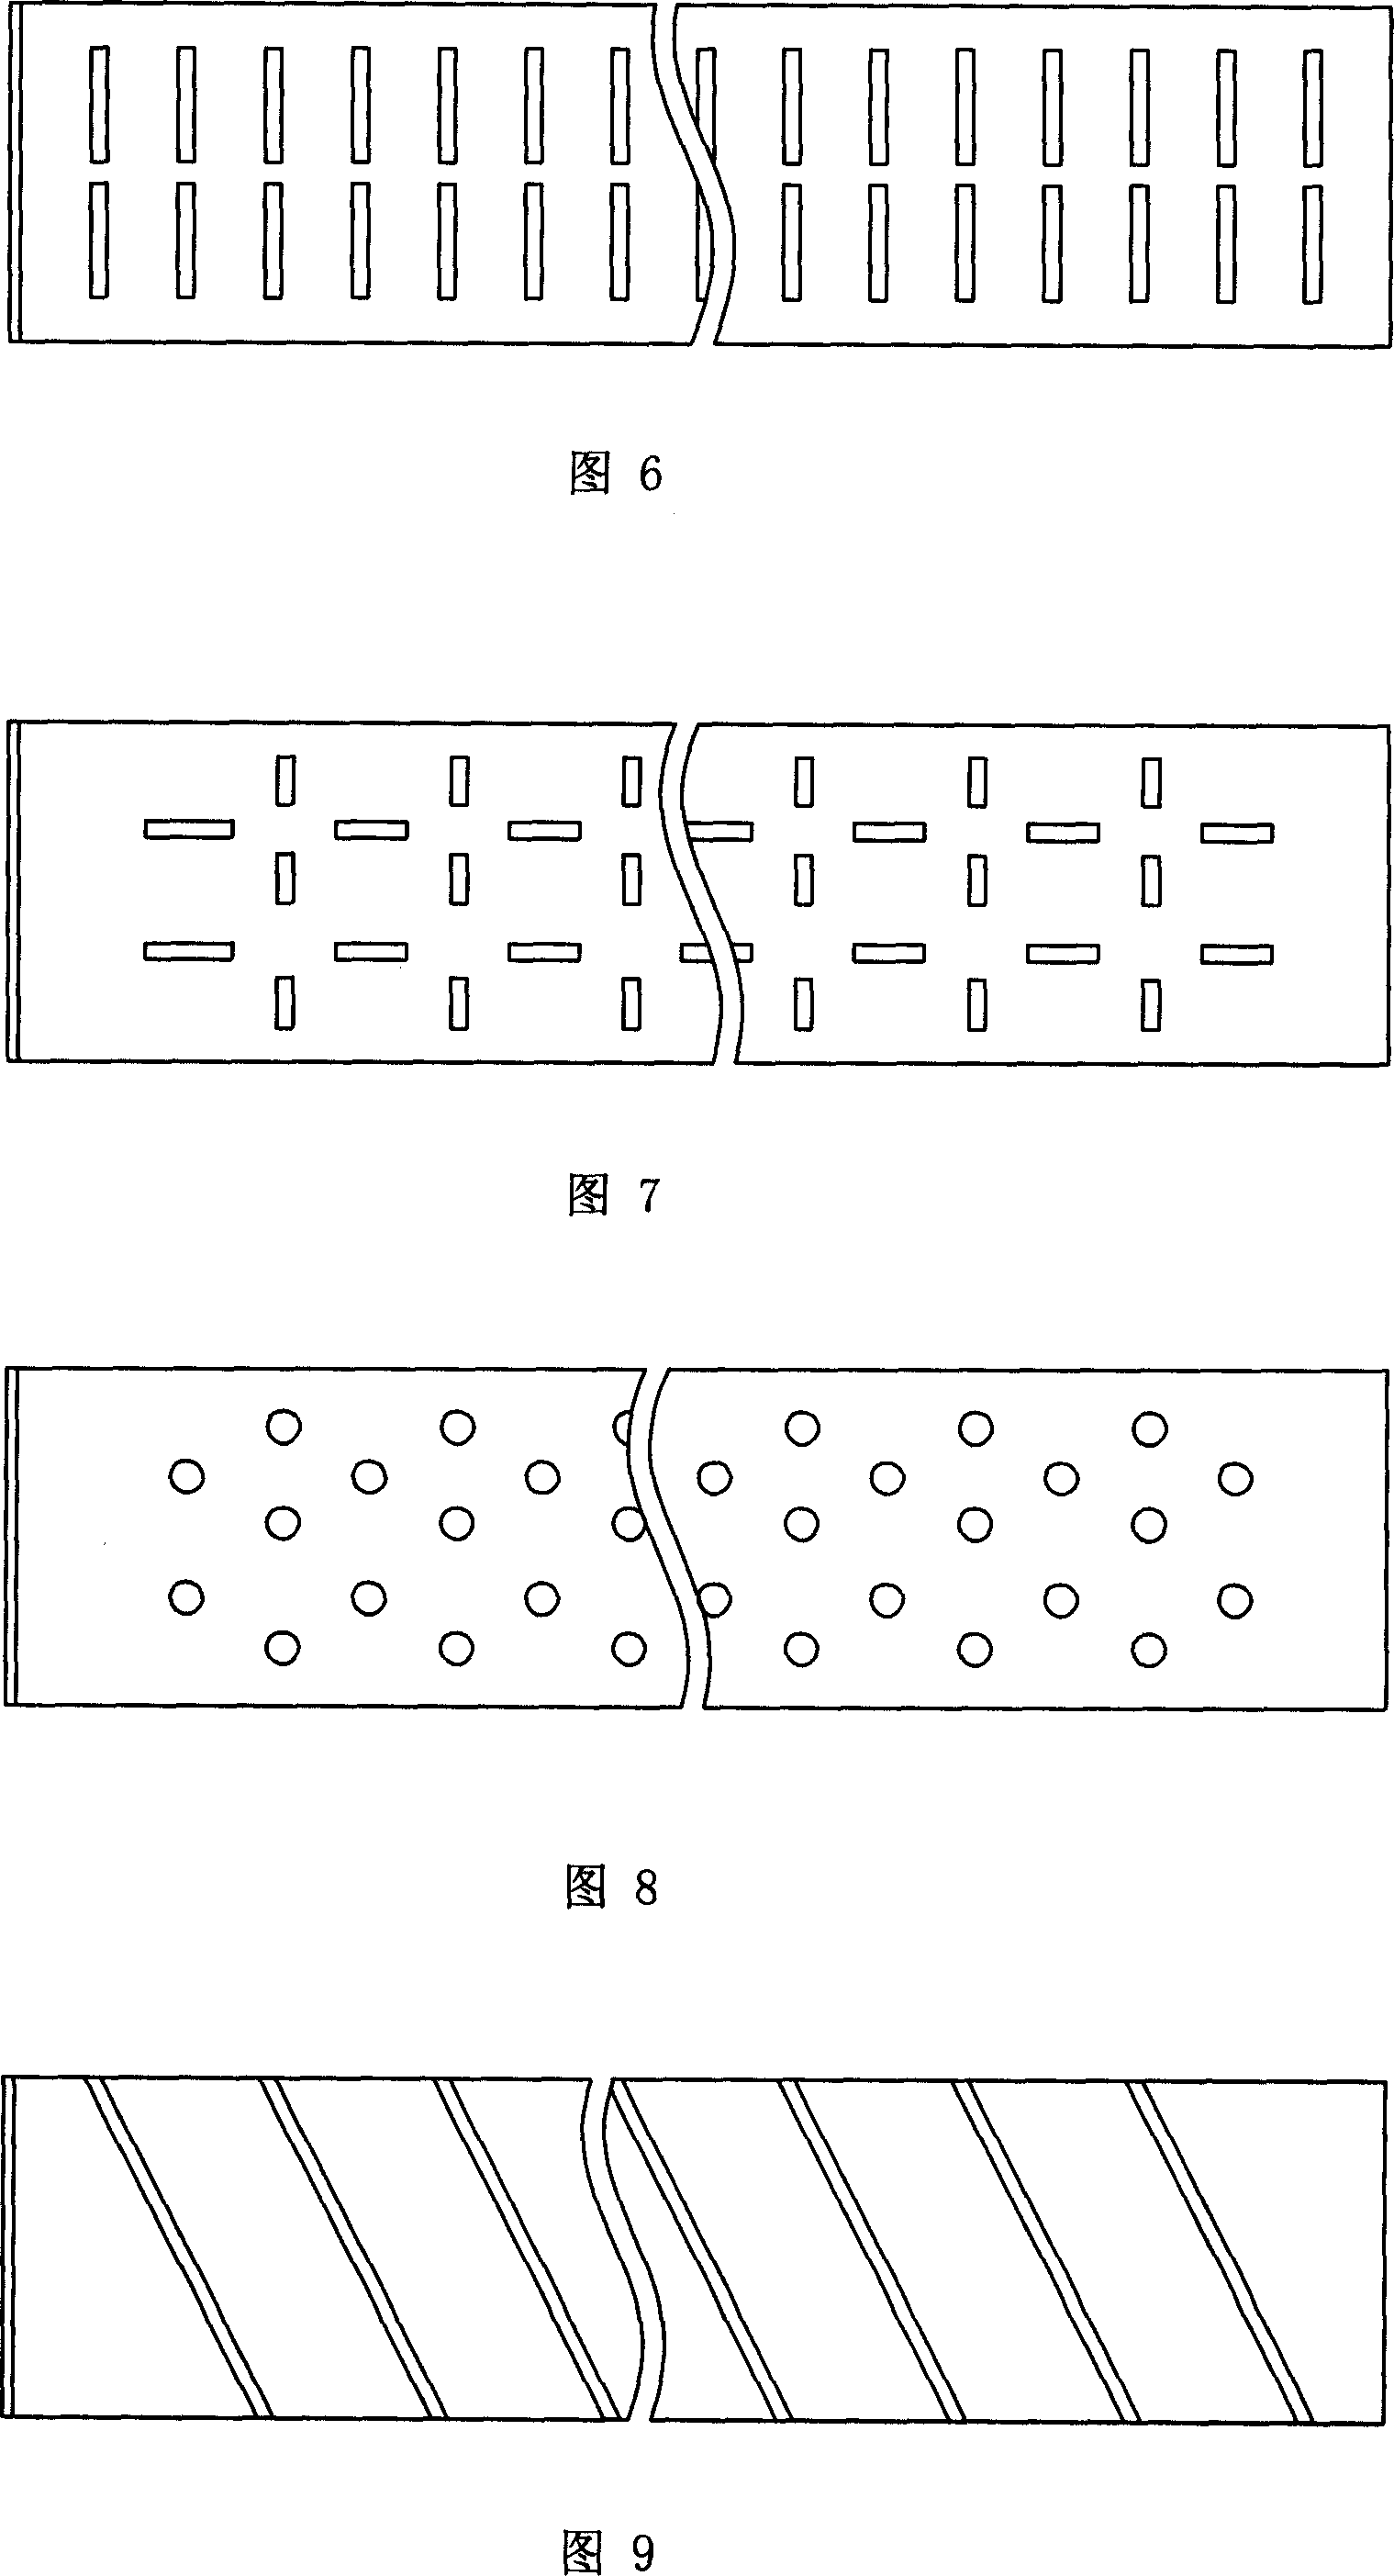 Equalizing three-layered wood compound floor board and mfg. method